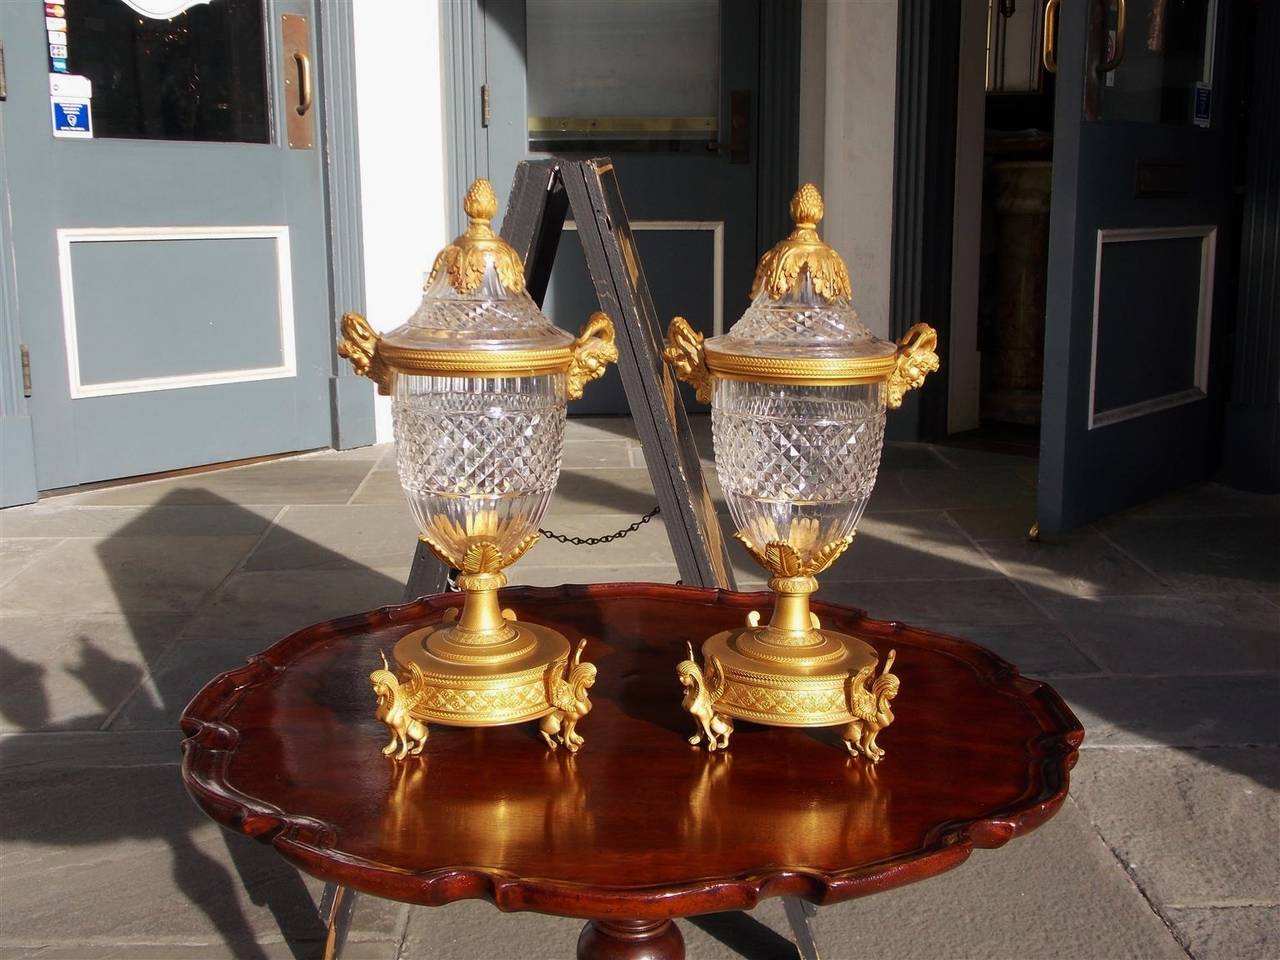 Pair of French ormolu and crystal compotes with artichoke finial tops. flanking Bacchus mounts, foliage motif, and terminating on round plinths with sphinx feet. Early 19th Century